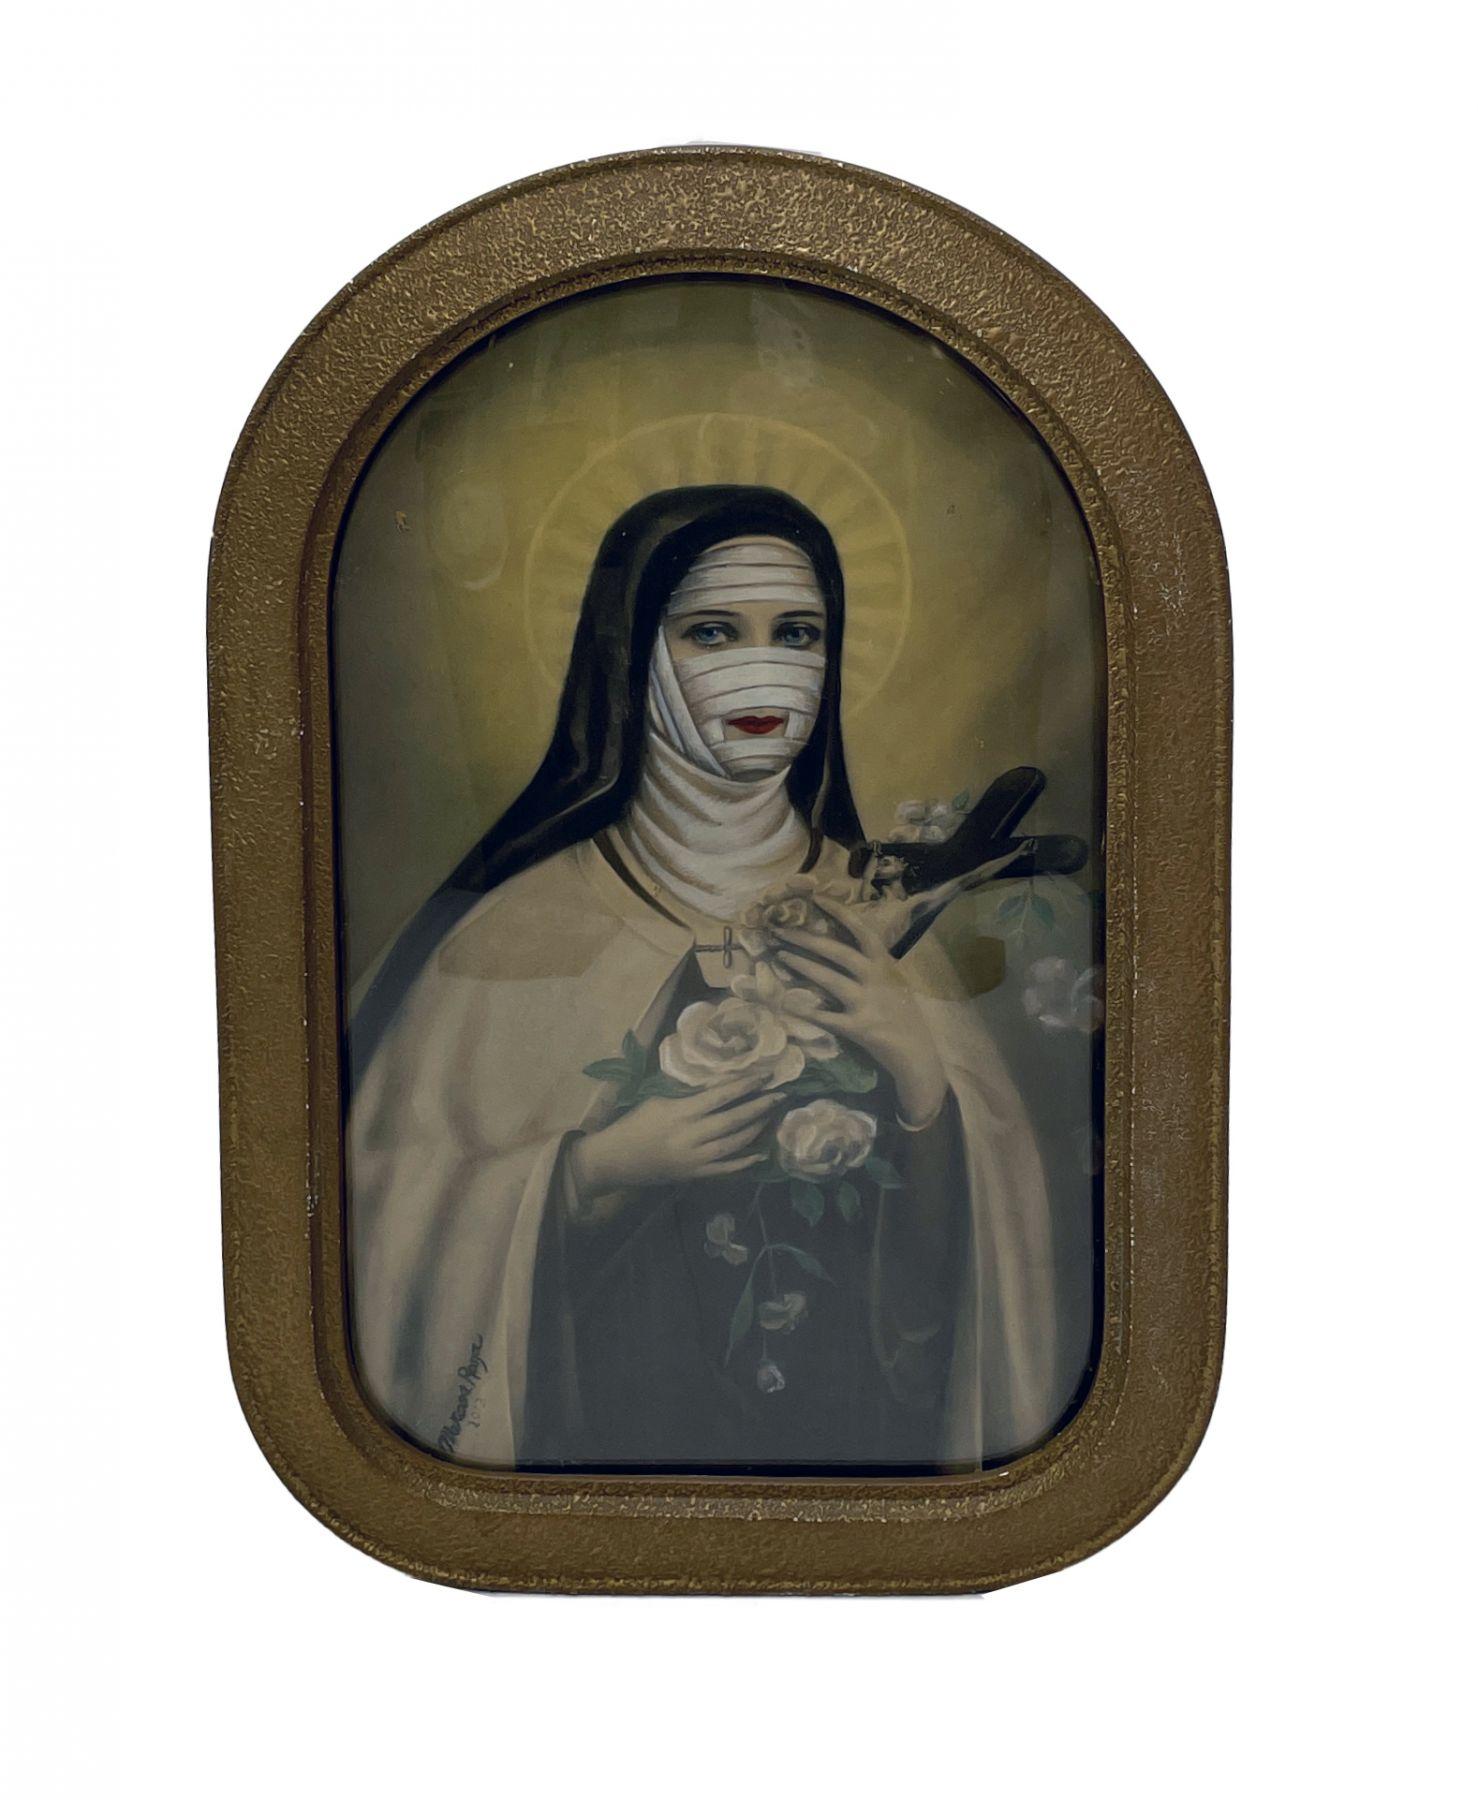 St. Theresa #1 - Antique Painted Photograph in Frame - Mixed Media Art by Marcos Raya